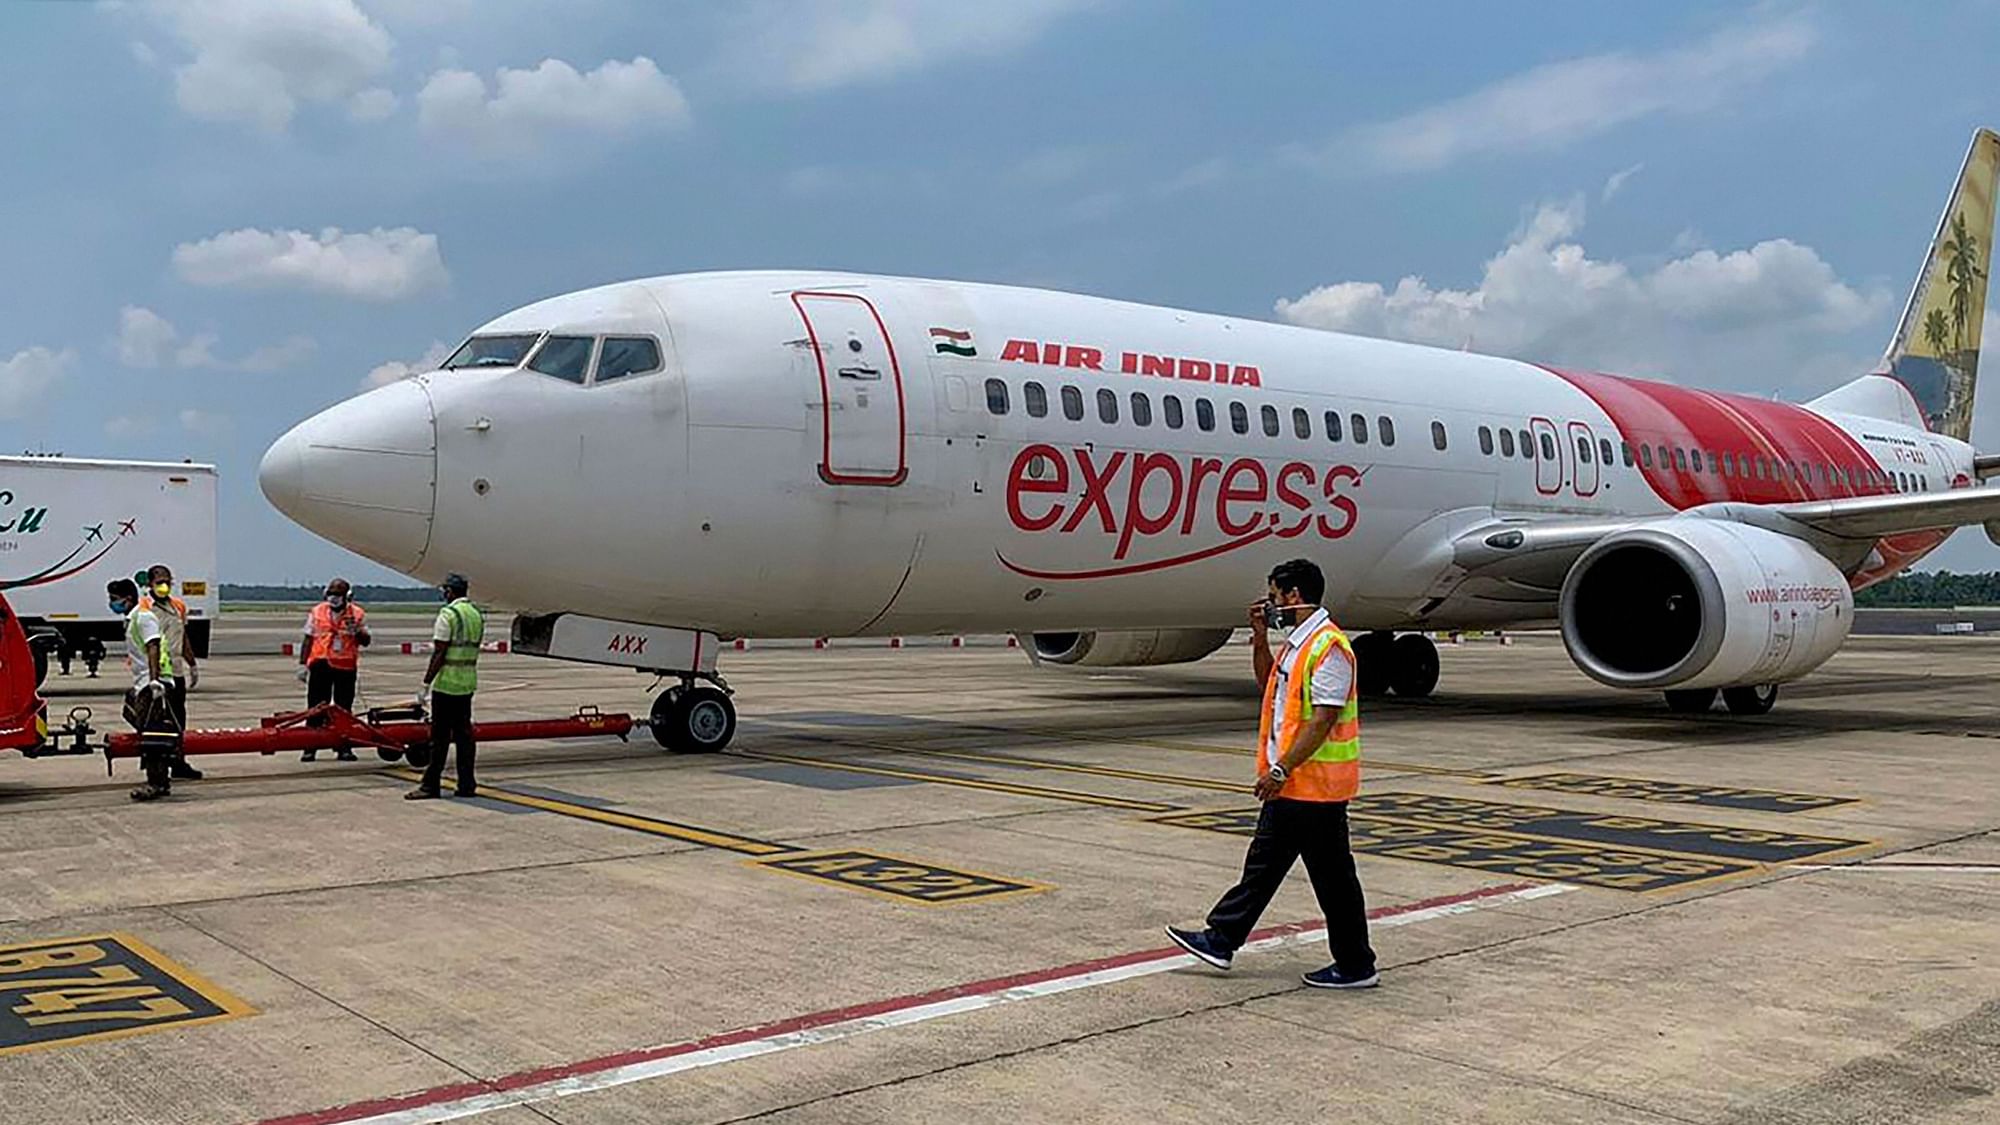 Union Civil Minister Hardeep Singh Puri on Thursday said that bidding for Air India would be done on the basis of its enterprise value instead of equity value.